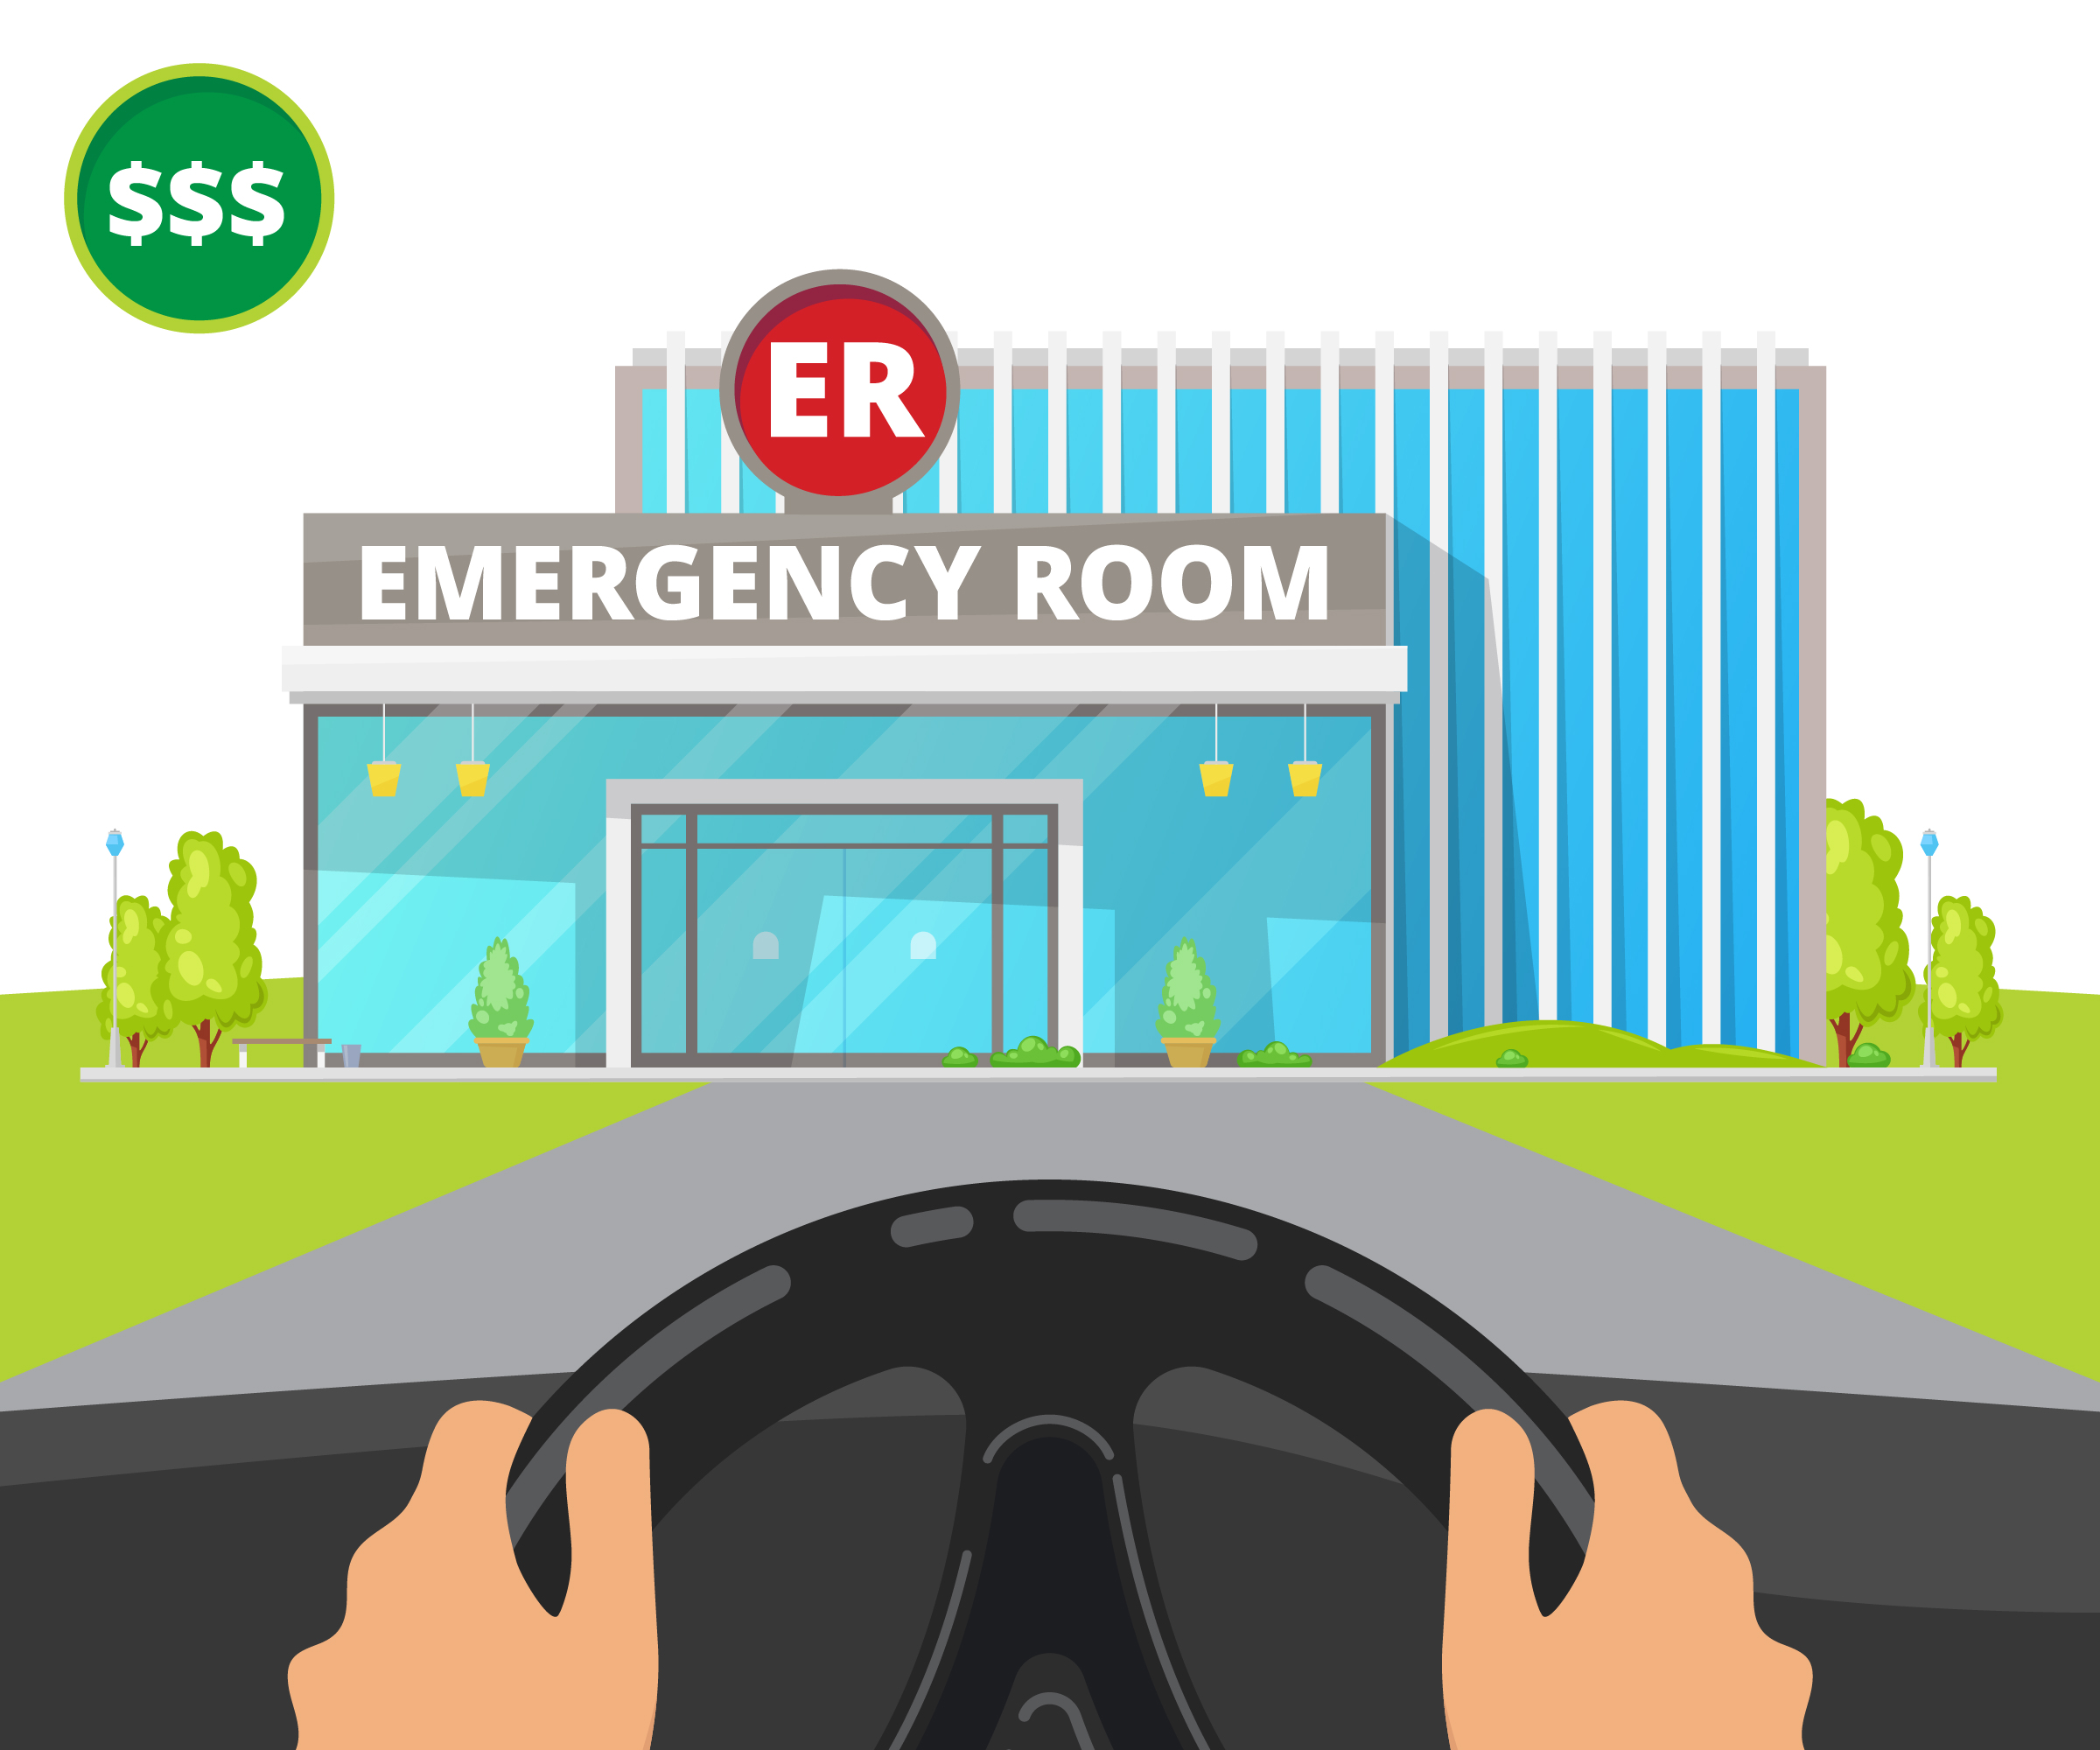 Illustration of an emergency room